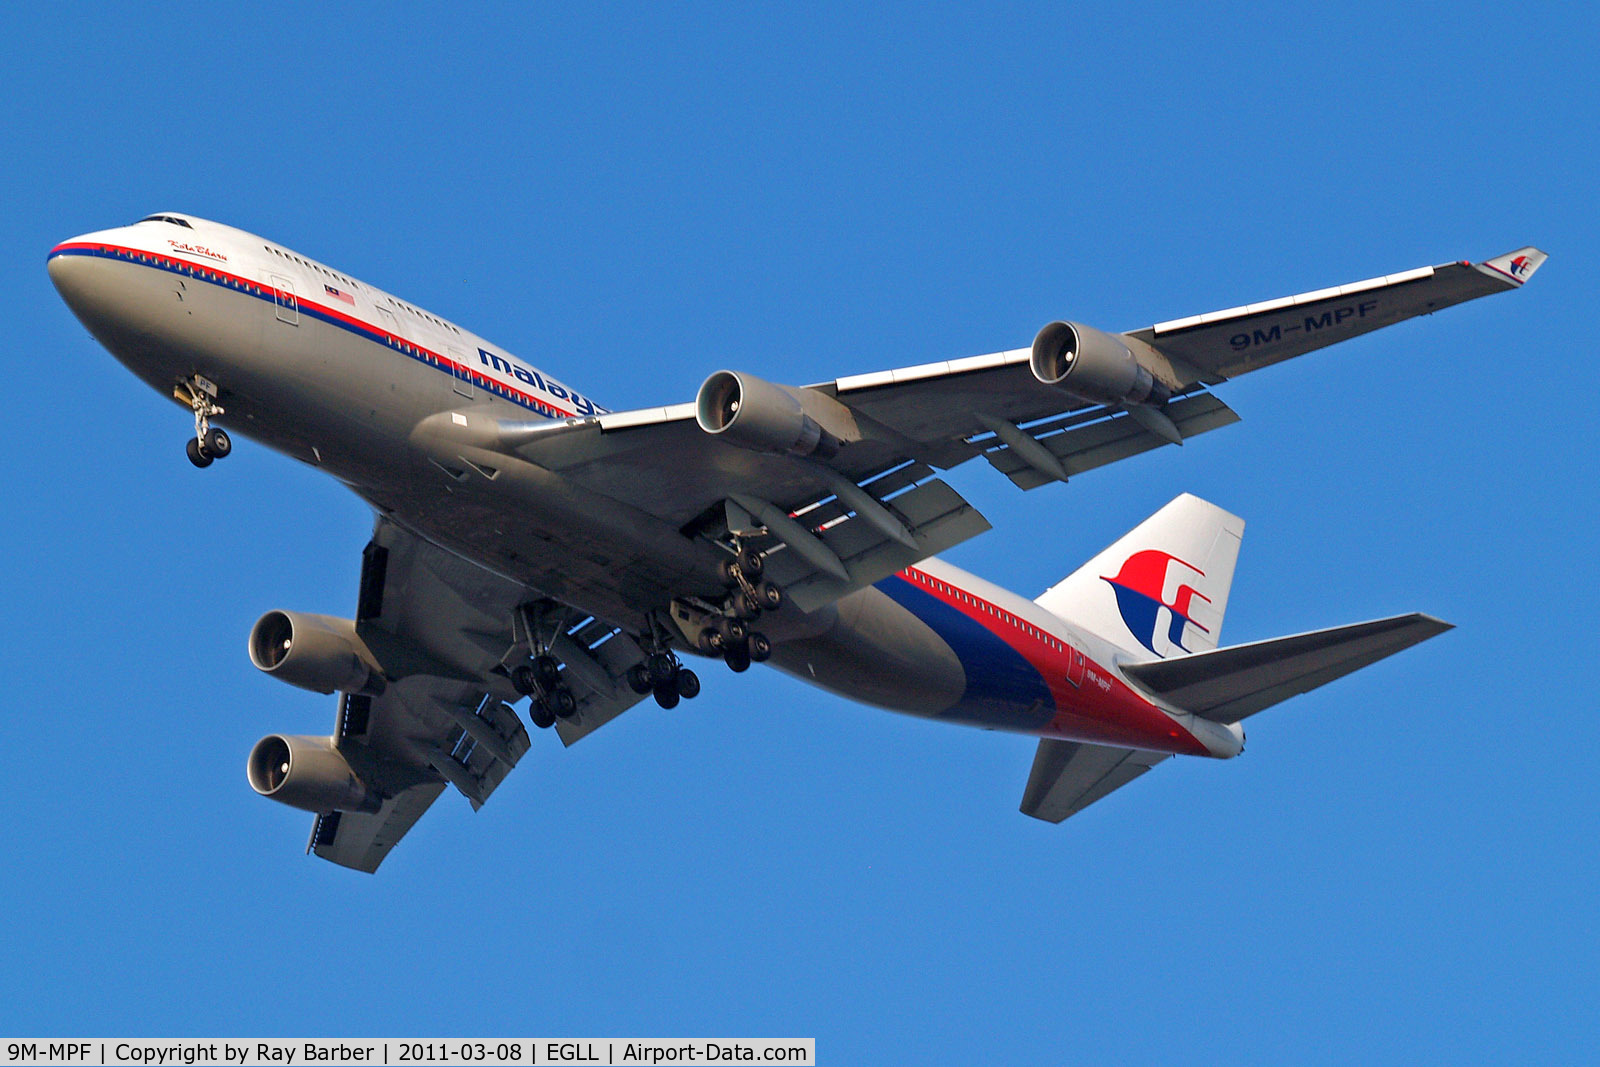 9M-MPF, 1994 Boeing 747-4H6 C/N 27043, 9M-MPF   Boeing 747-4H6 [27043] (Malaysia Airlines) Home~G 08/03/2011